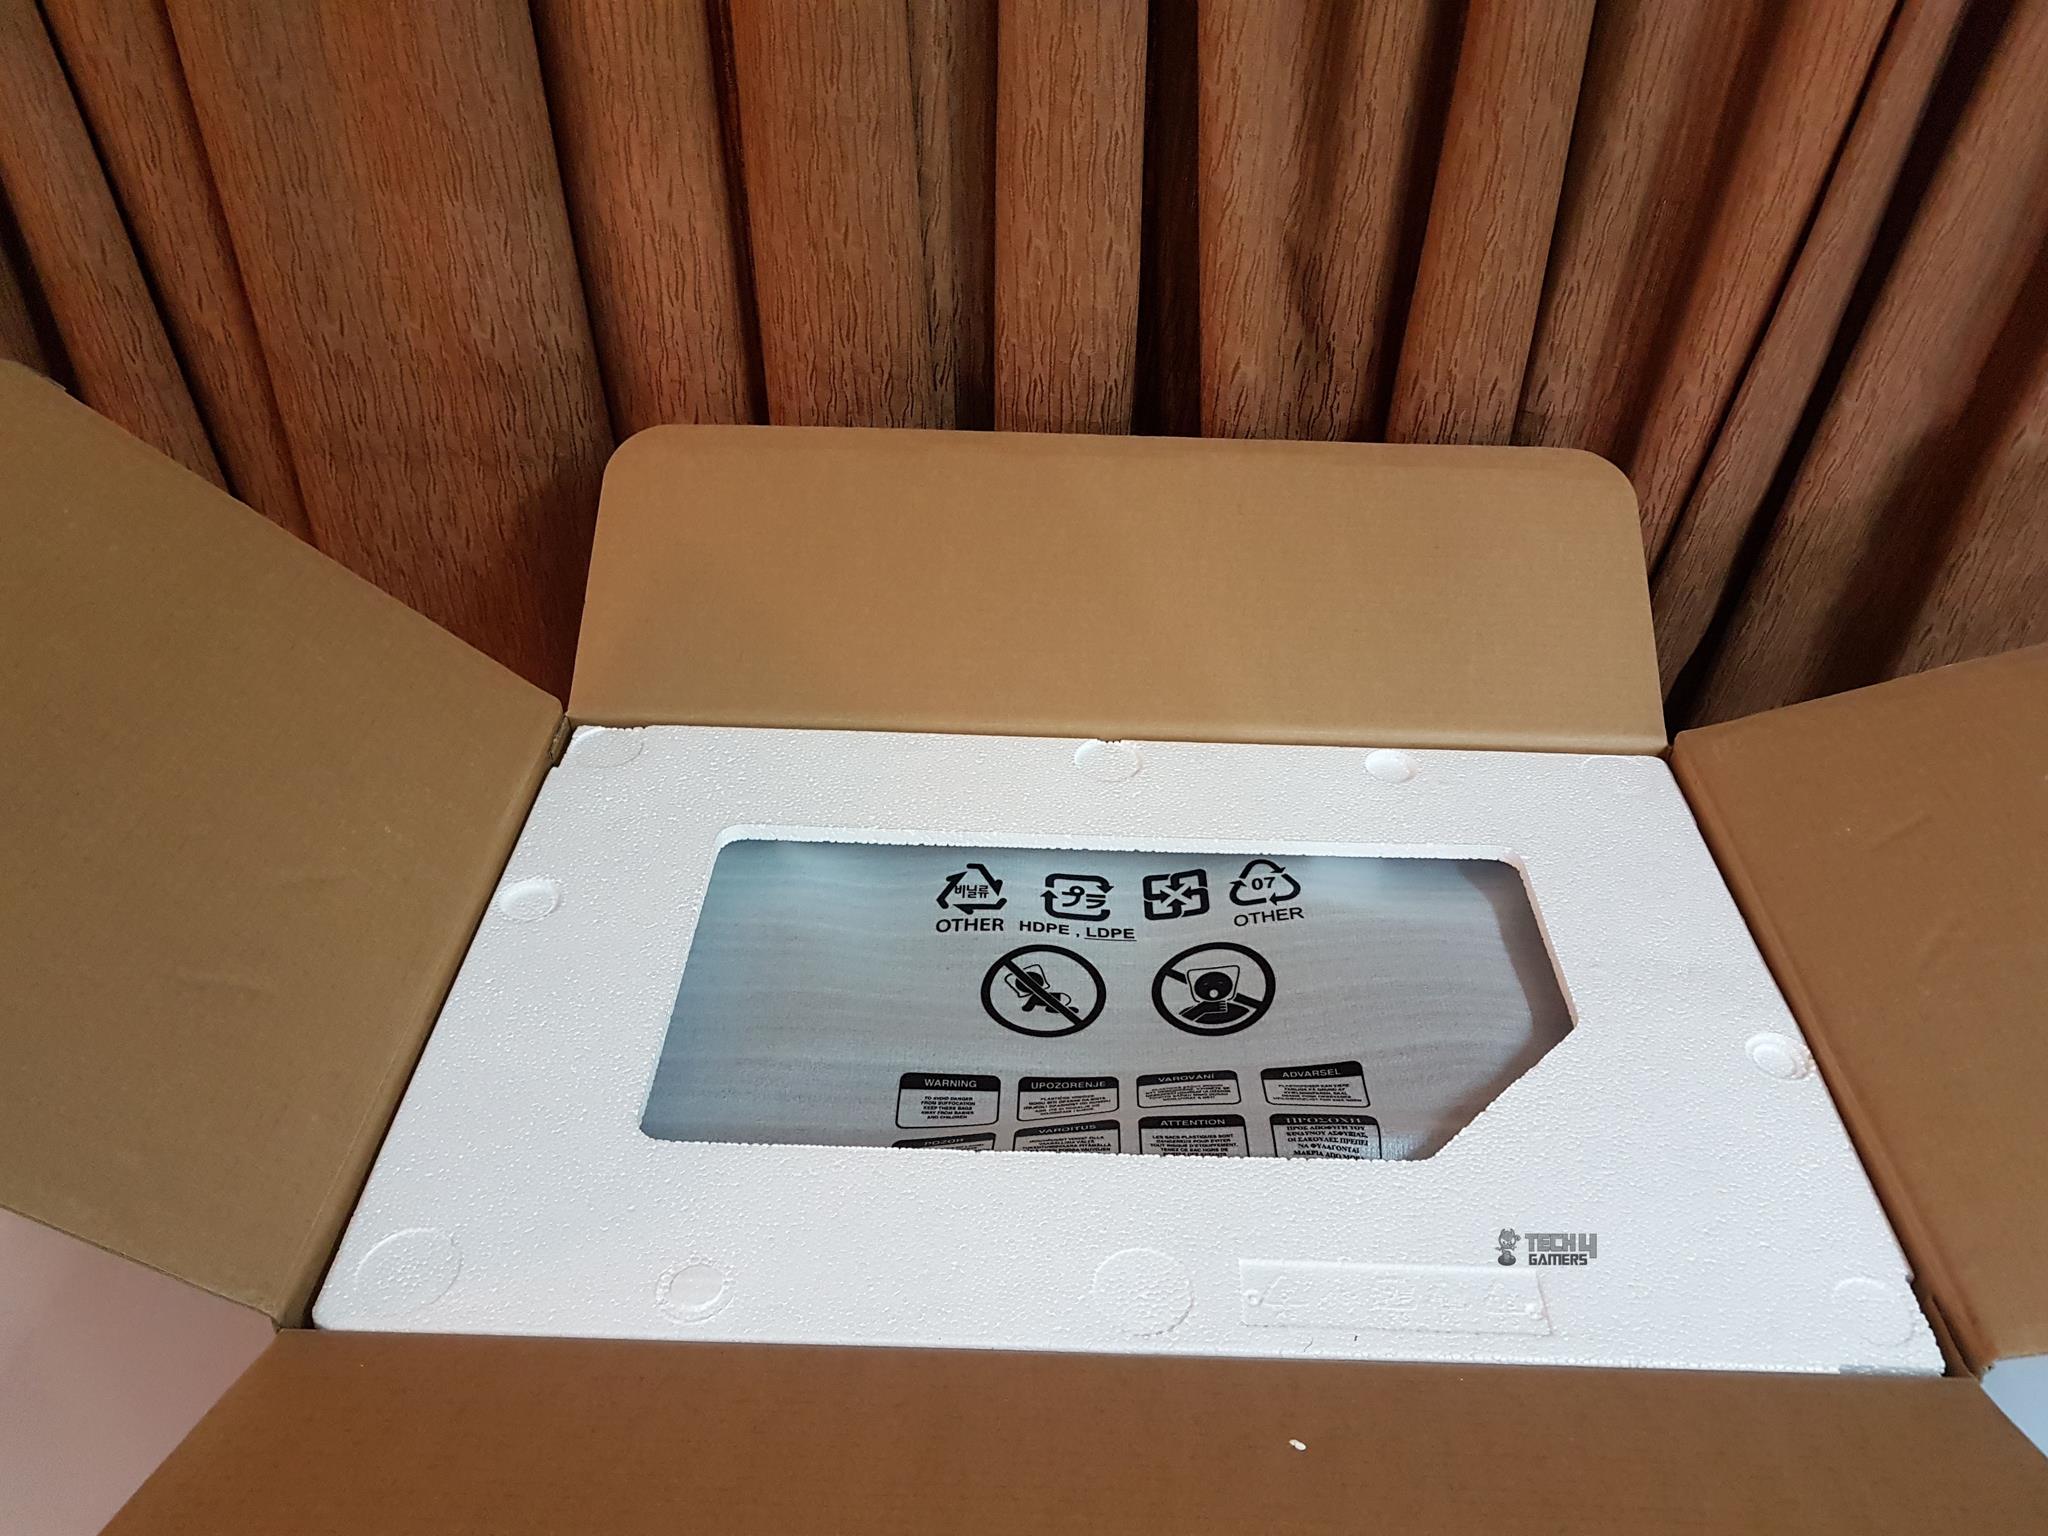 Zowe Monitor Unboxing